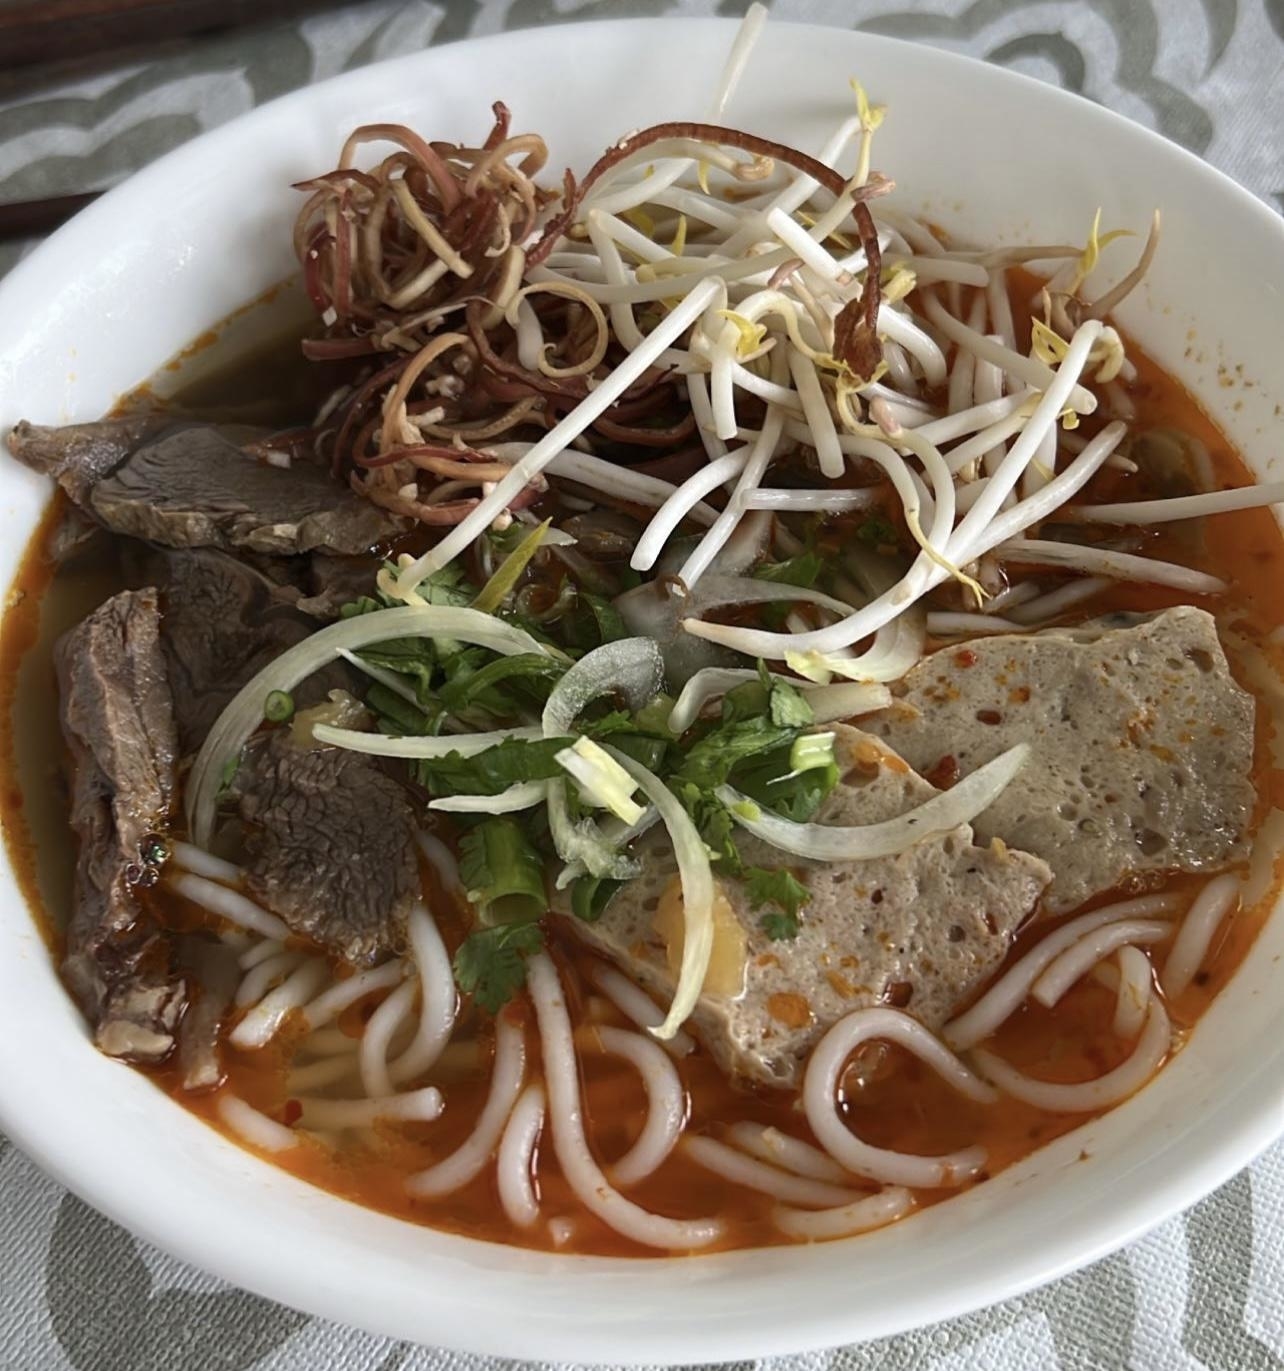 Bowl of Vietnamese Pho with noodles, beef slices, bean sprouts, and herbs